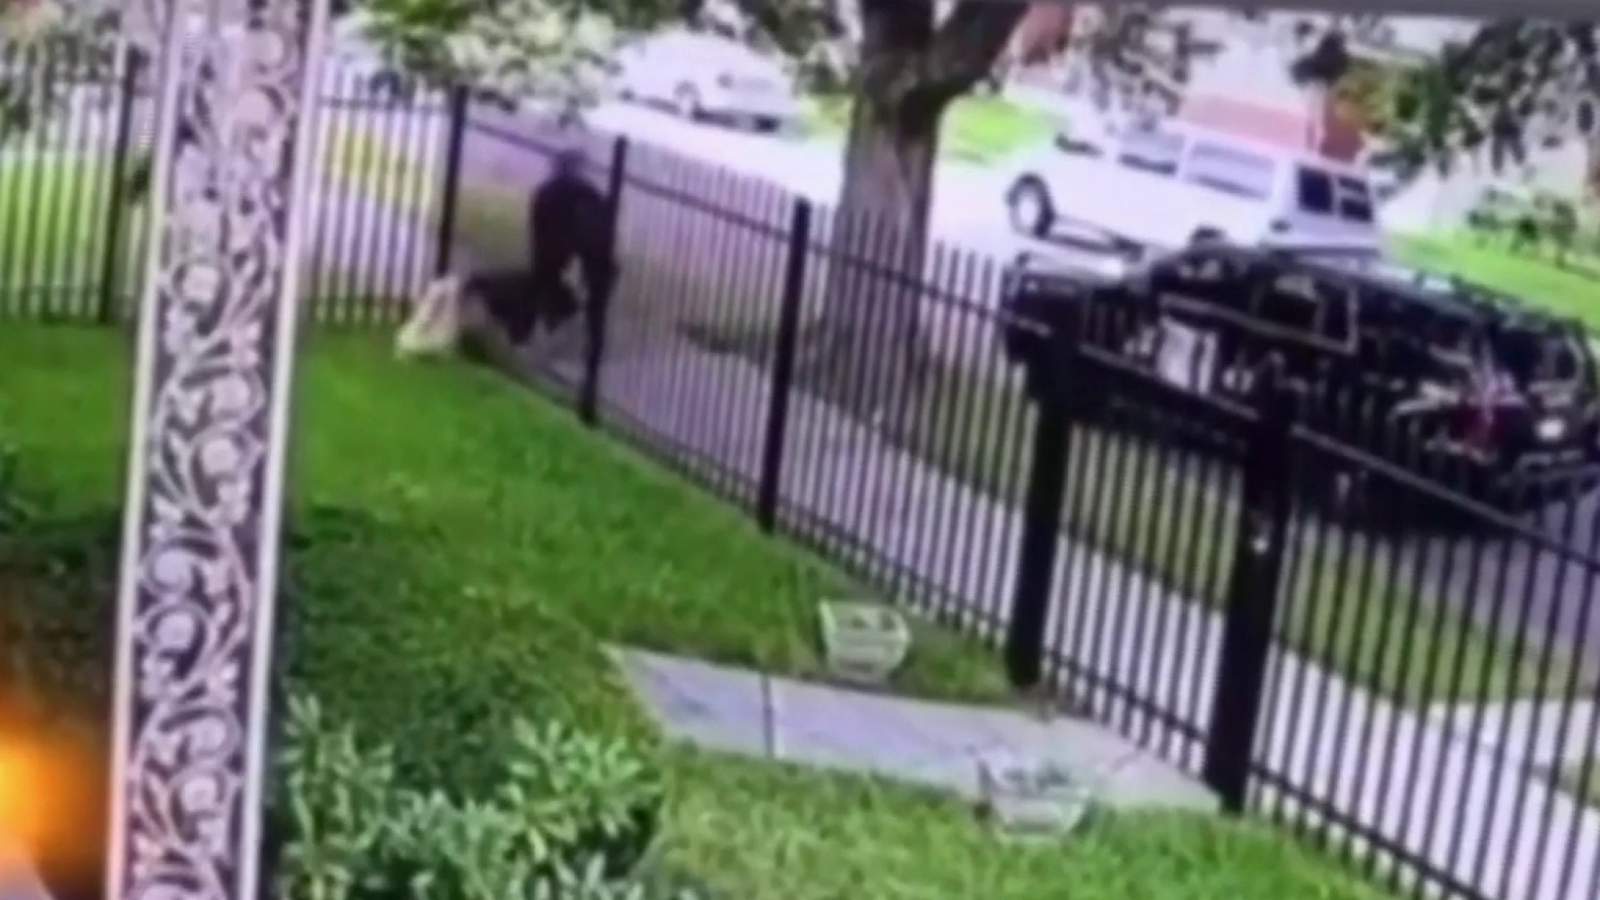 Detroit police chief provides details in officers shooting of dog on other side of fence